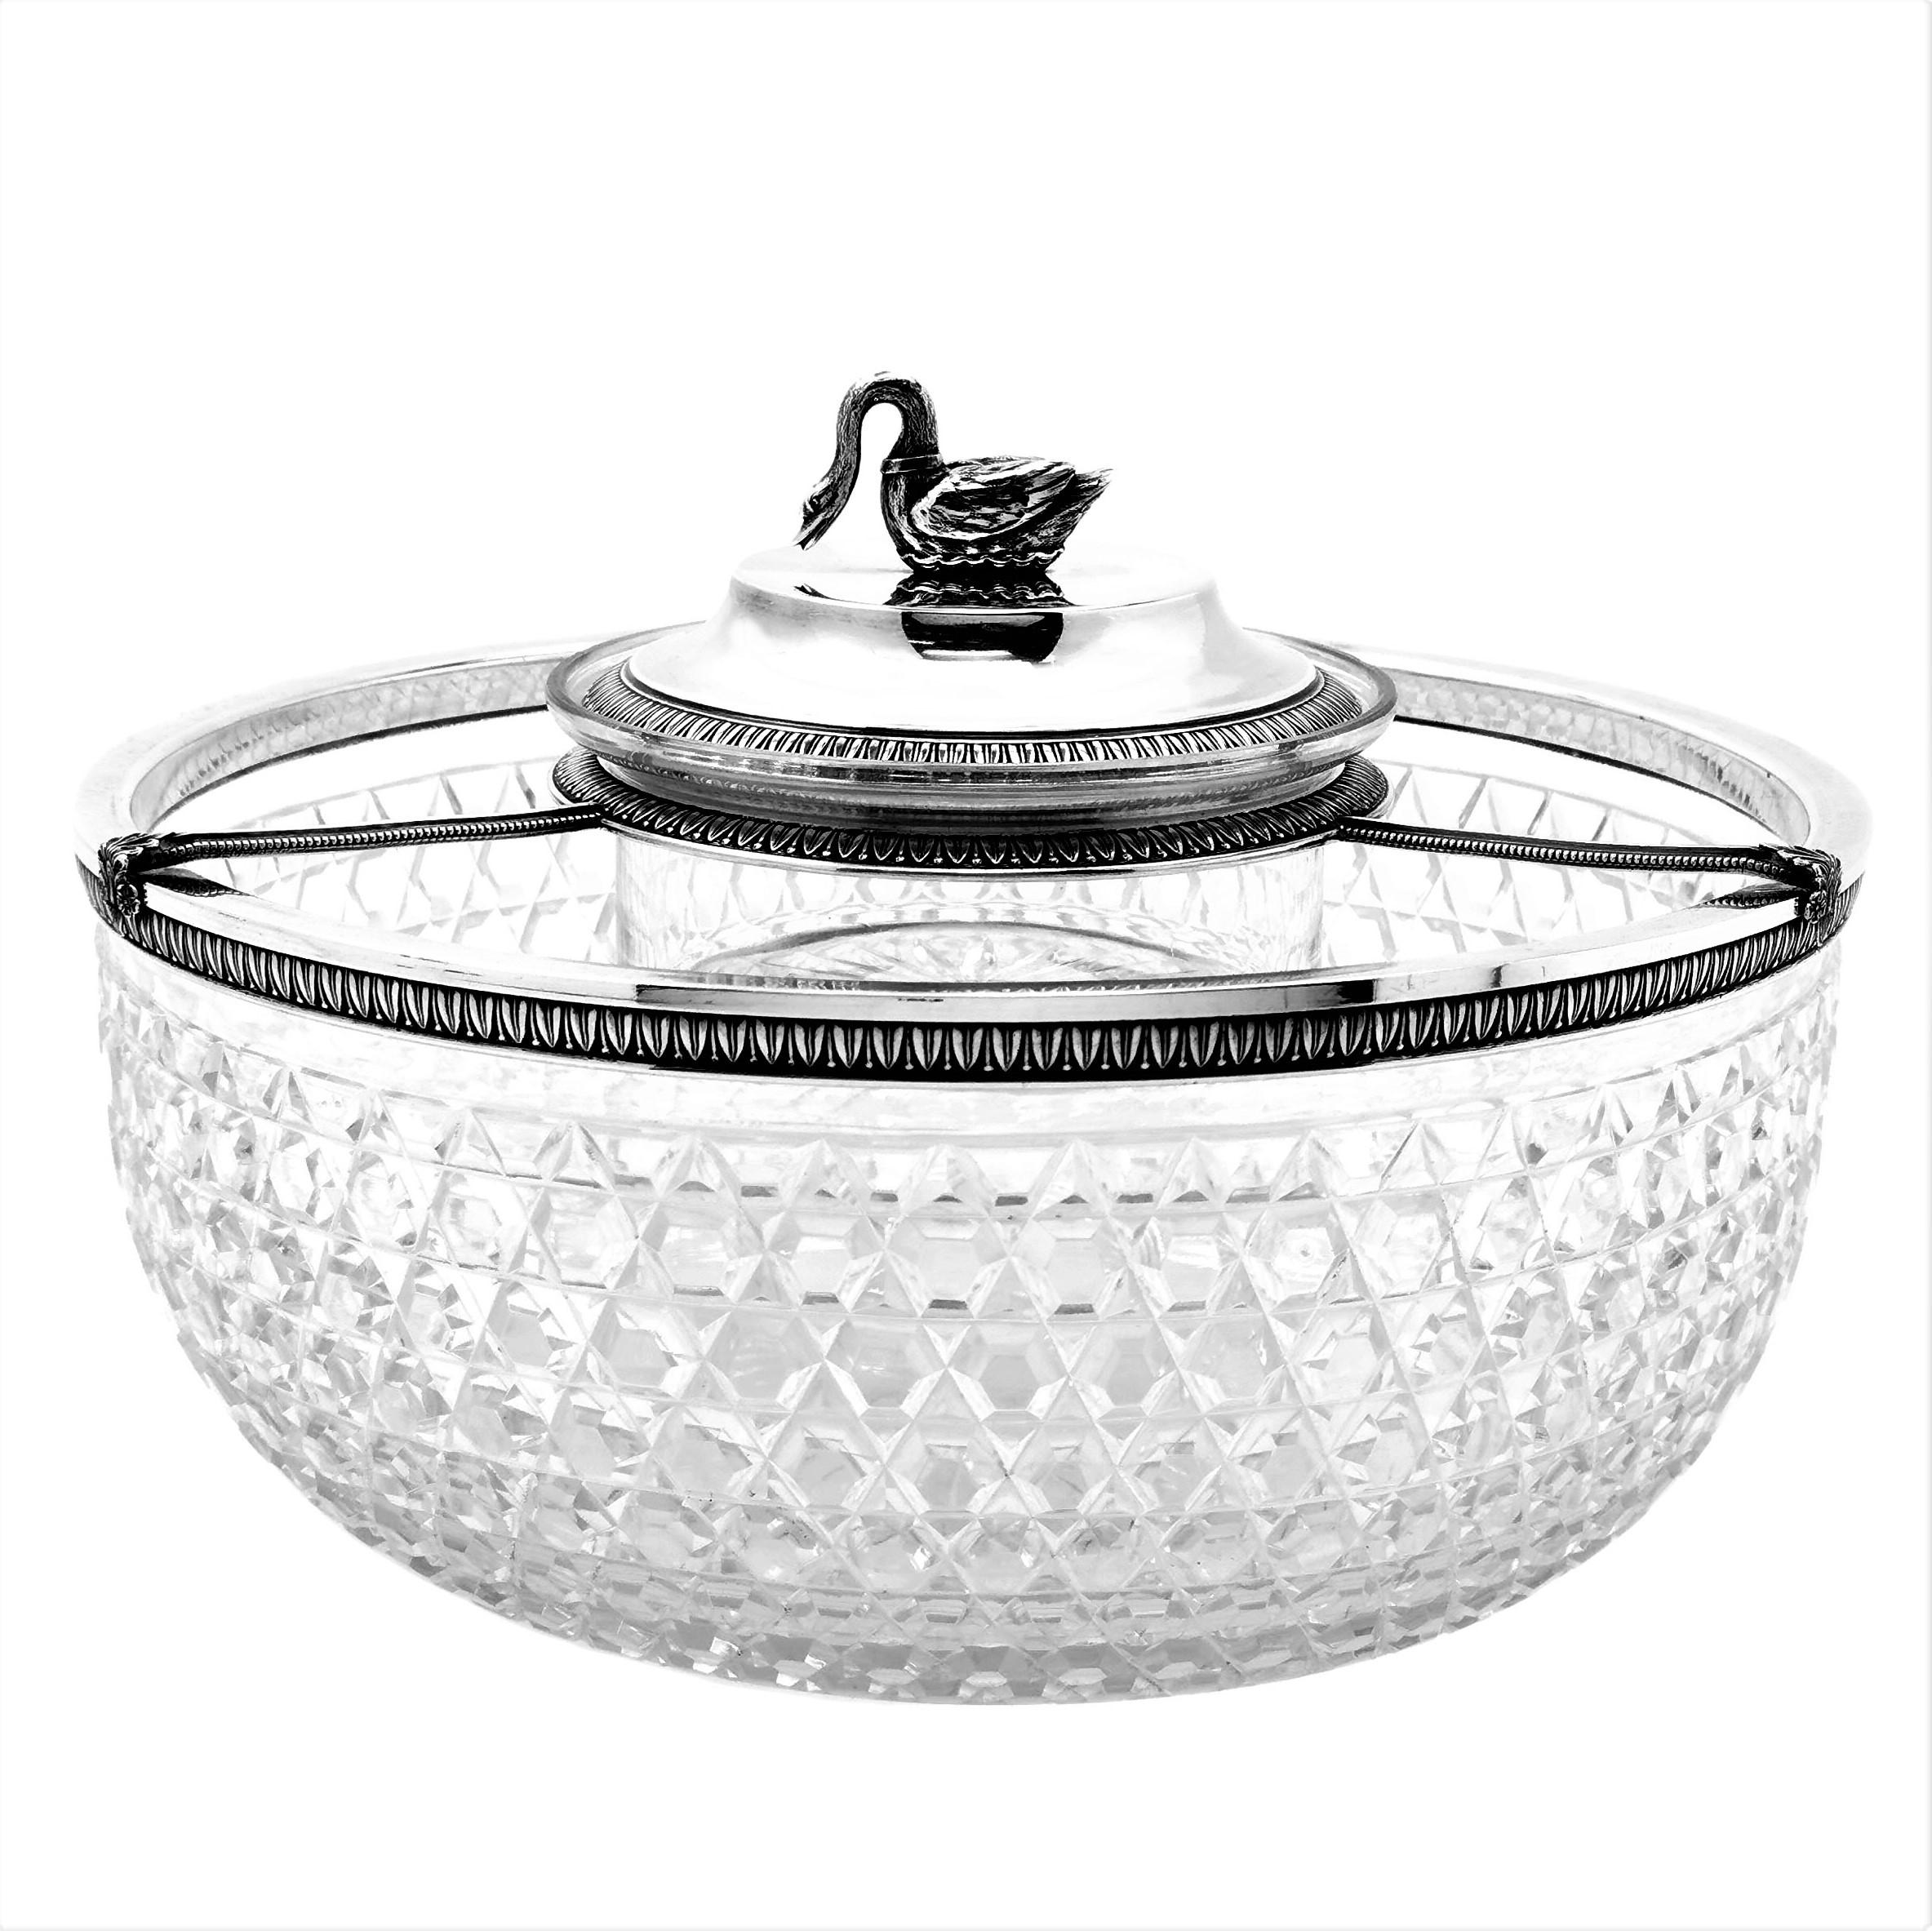 A beautiful antique French solid silver mounted cut glass caviar serving set. The large bowl has Classic hobnail pattern glass with an elegant silver rim, patterned with a subtle stylised leaf pattern. This pattern is mirrored on the removable Stand